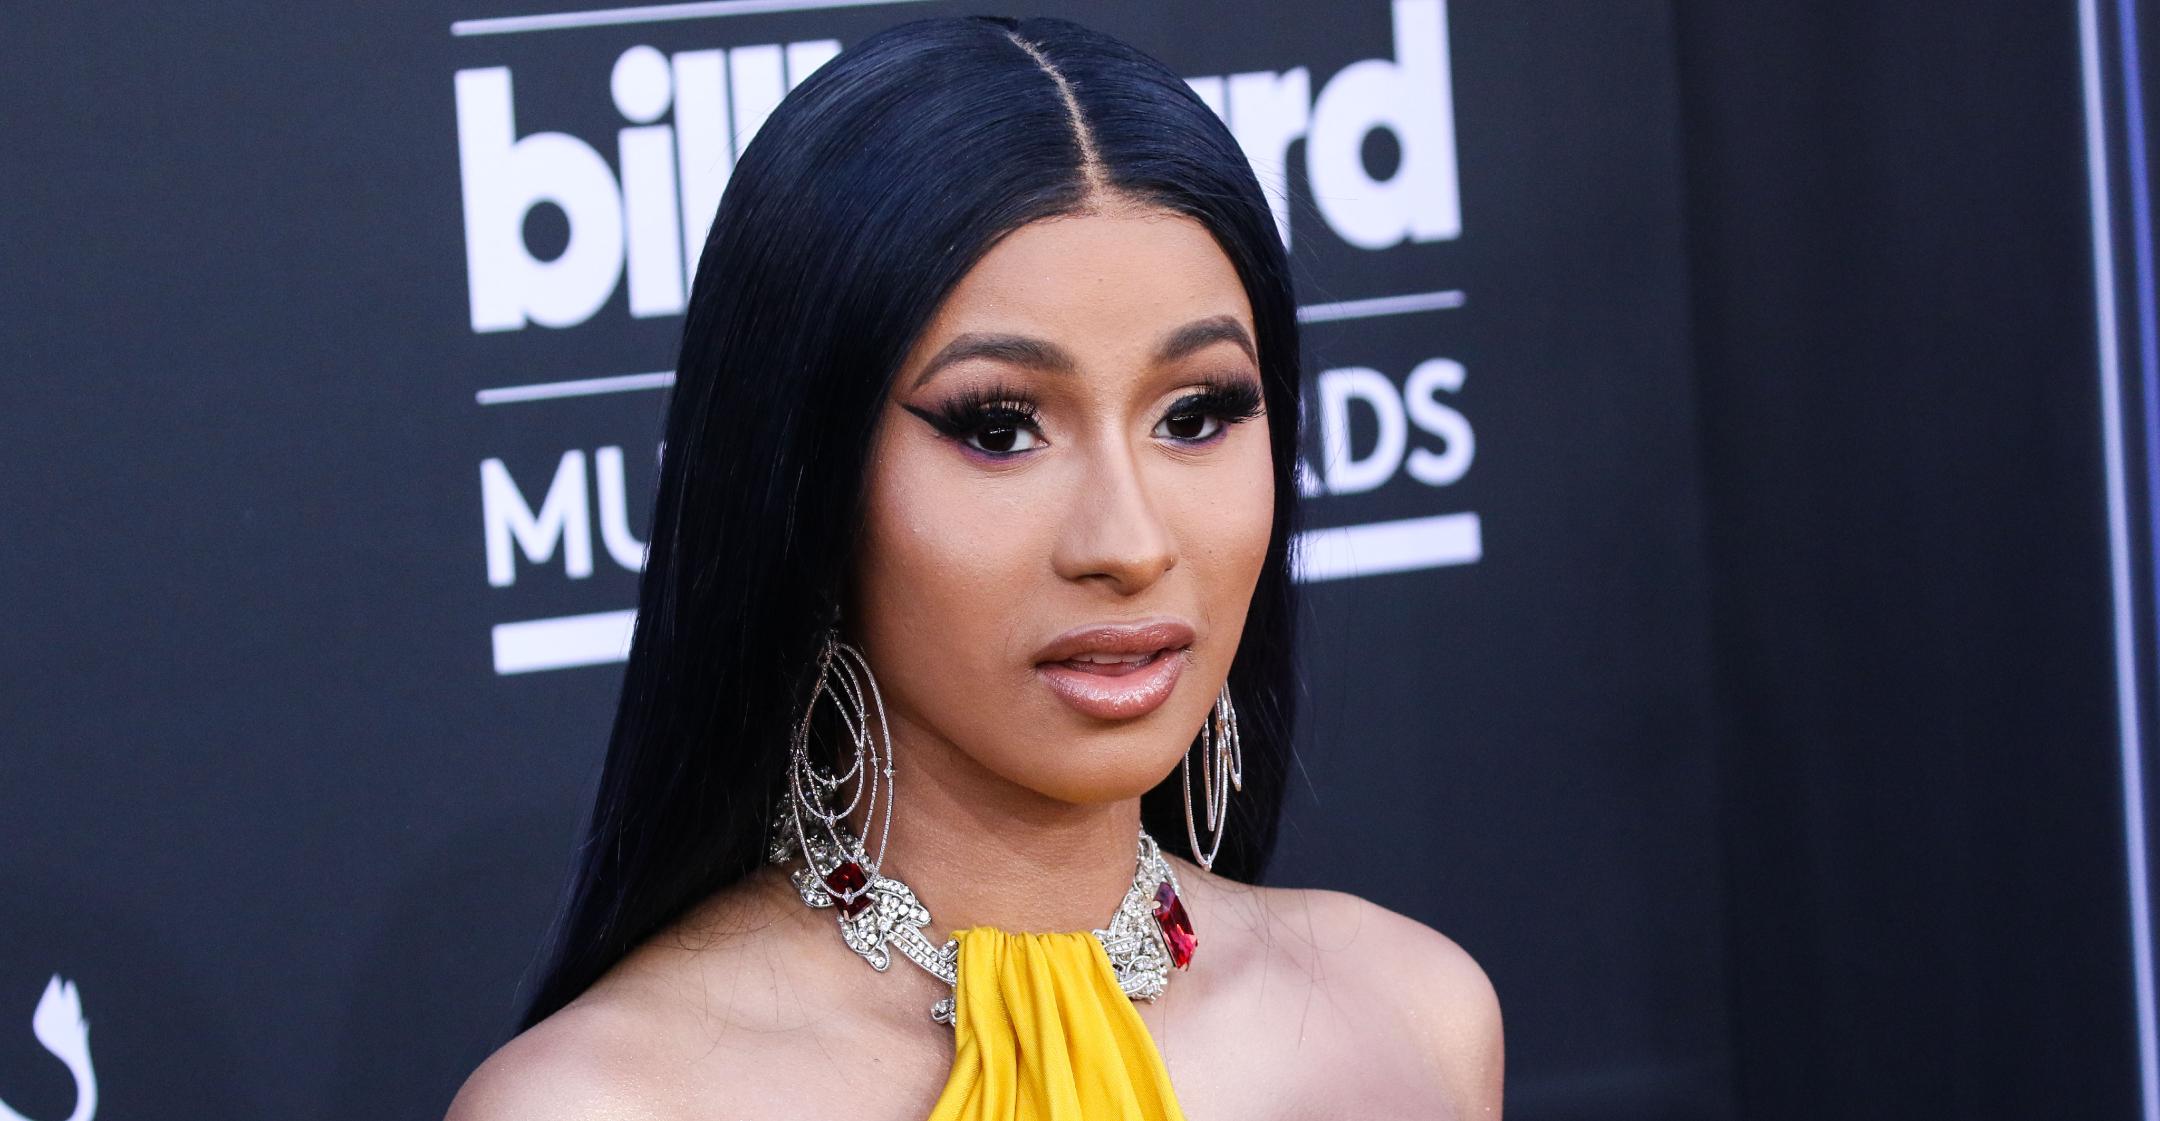 cardi b cover funeral costs bronx apartment fire